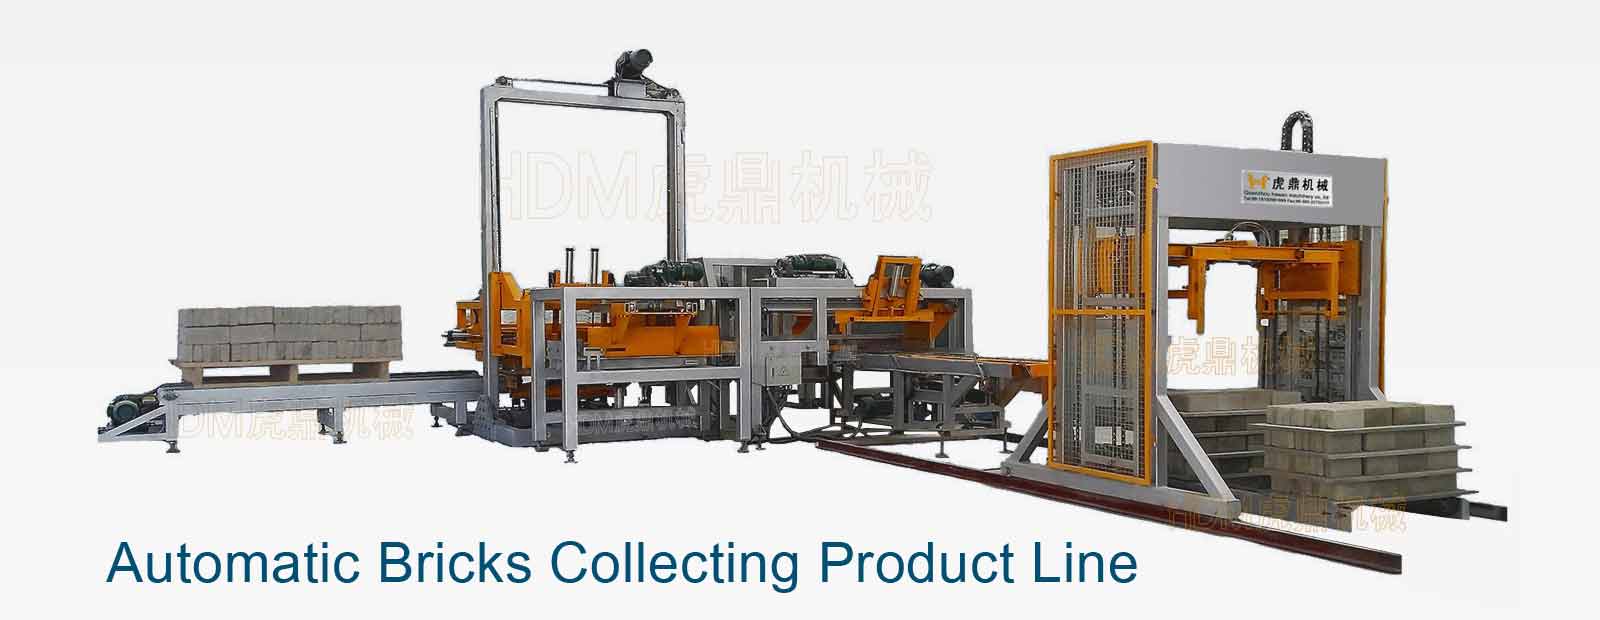 Automatic bricks collecting product line